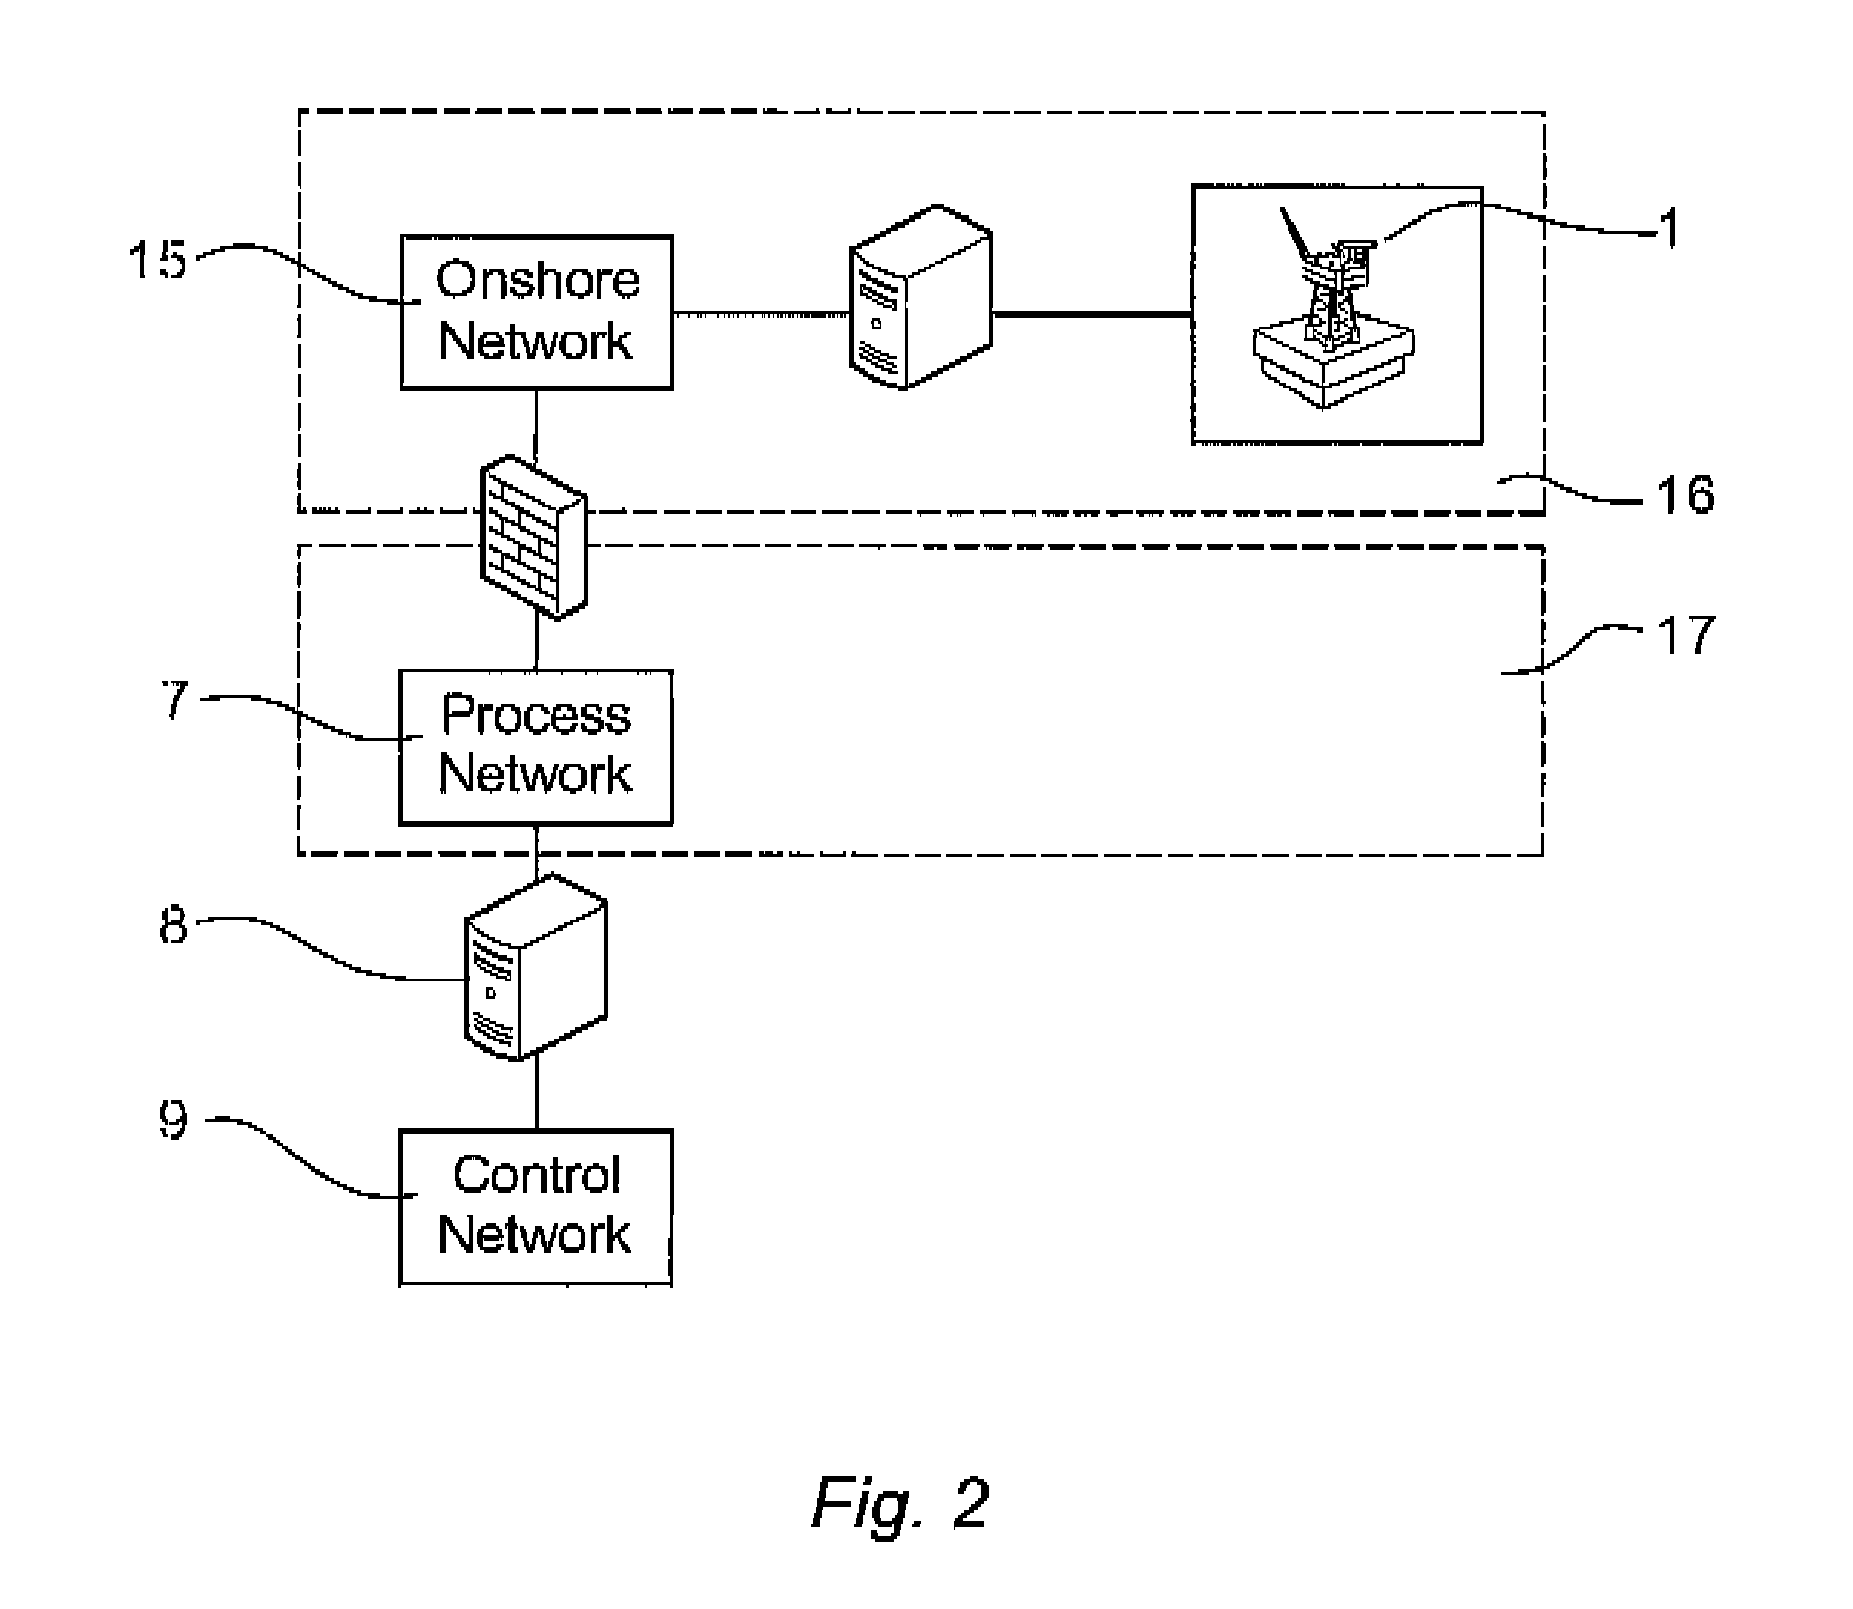 Computer implemented method to display technical data for monitoring an industrial installation